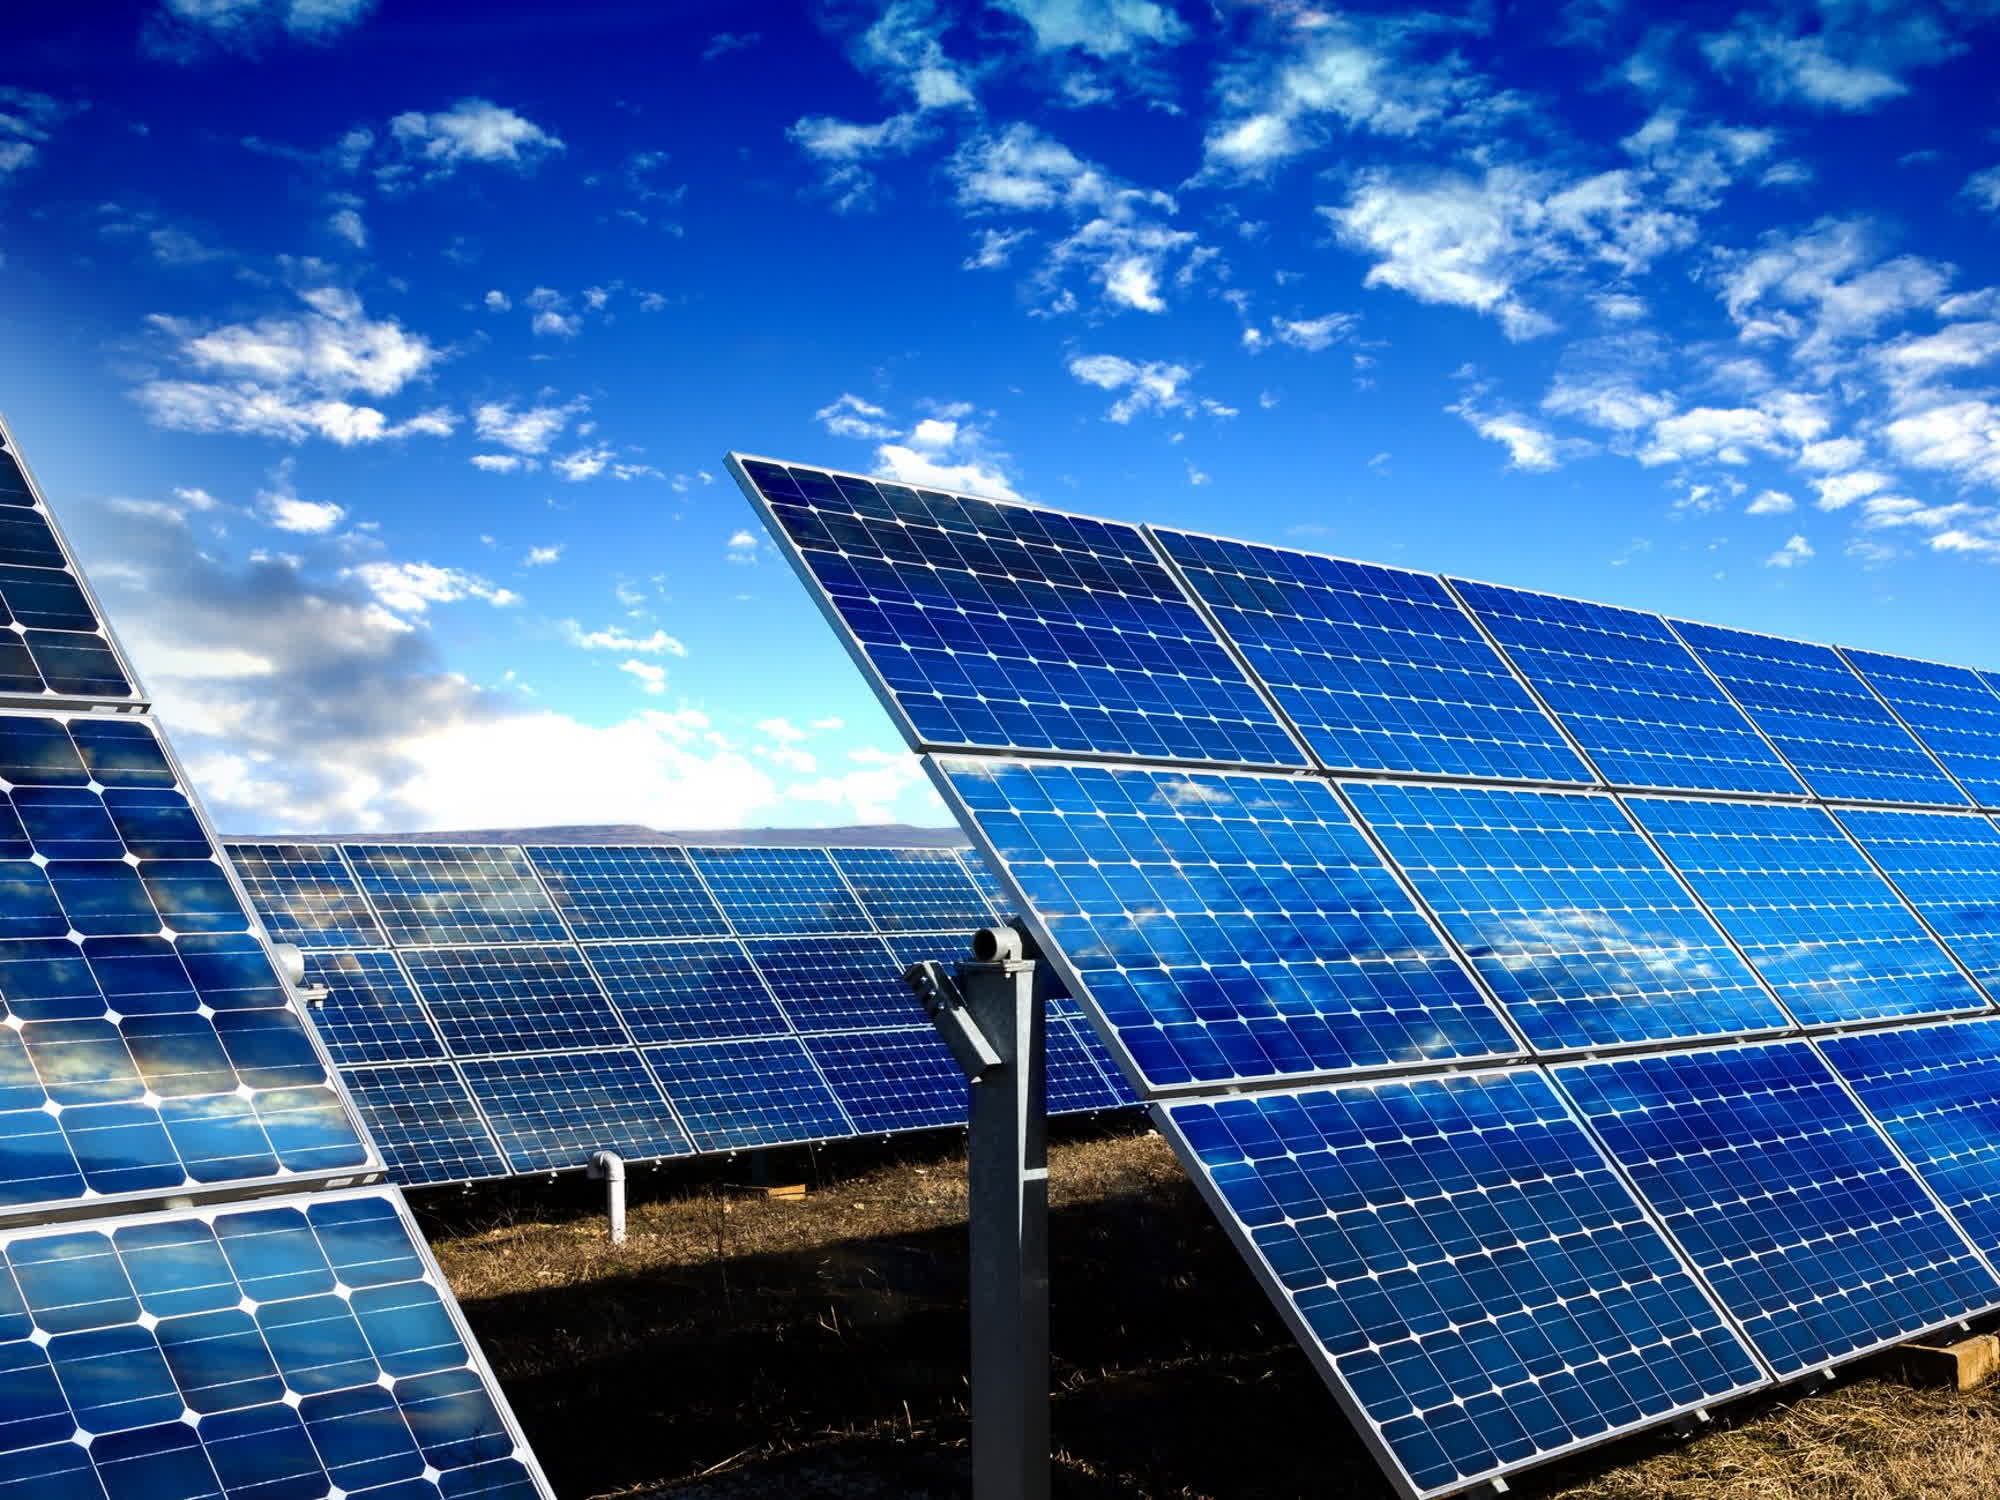 Global funding for solar power will outpace oil production in 2023